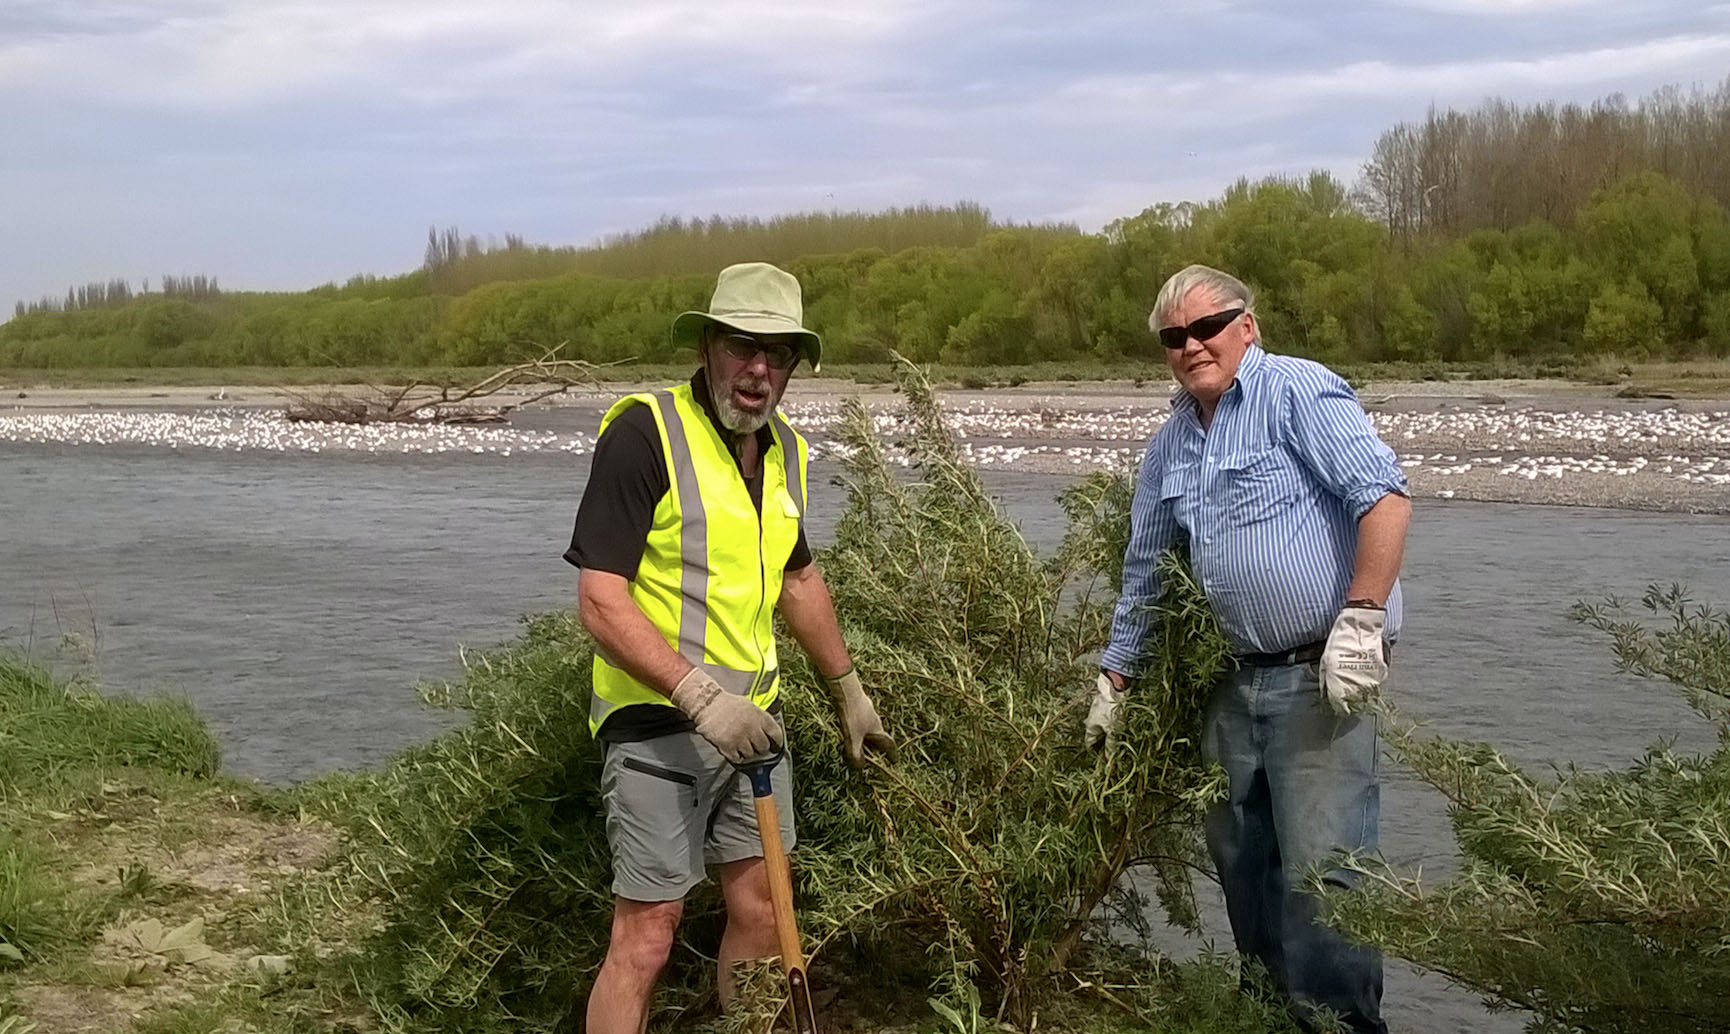 Pulling tree lupins on the Ashburton River. A colony of critically endangered back-billed gulls is trying to nest in the centre of the river. (The island was too low and flooding forced the birds to abandon their nest that year.) Photo: Don Geddes.